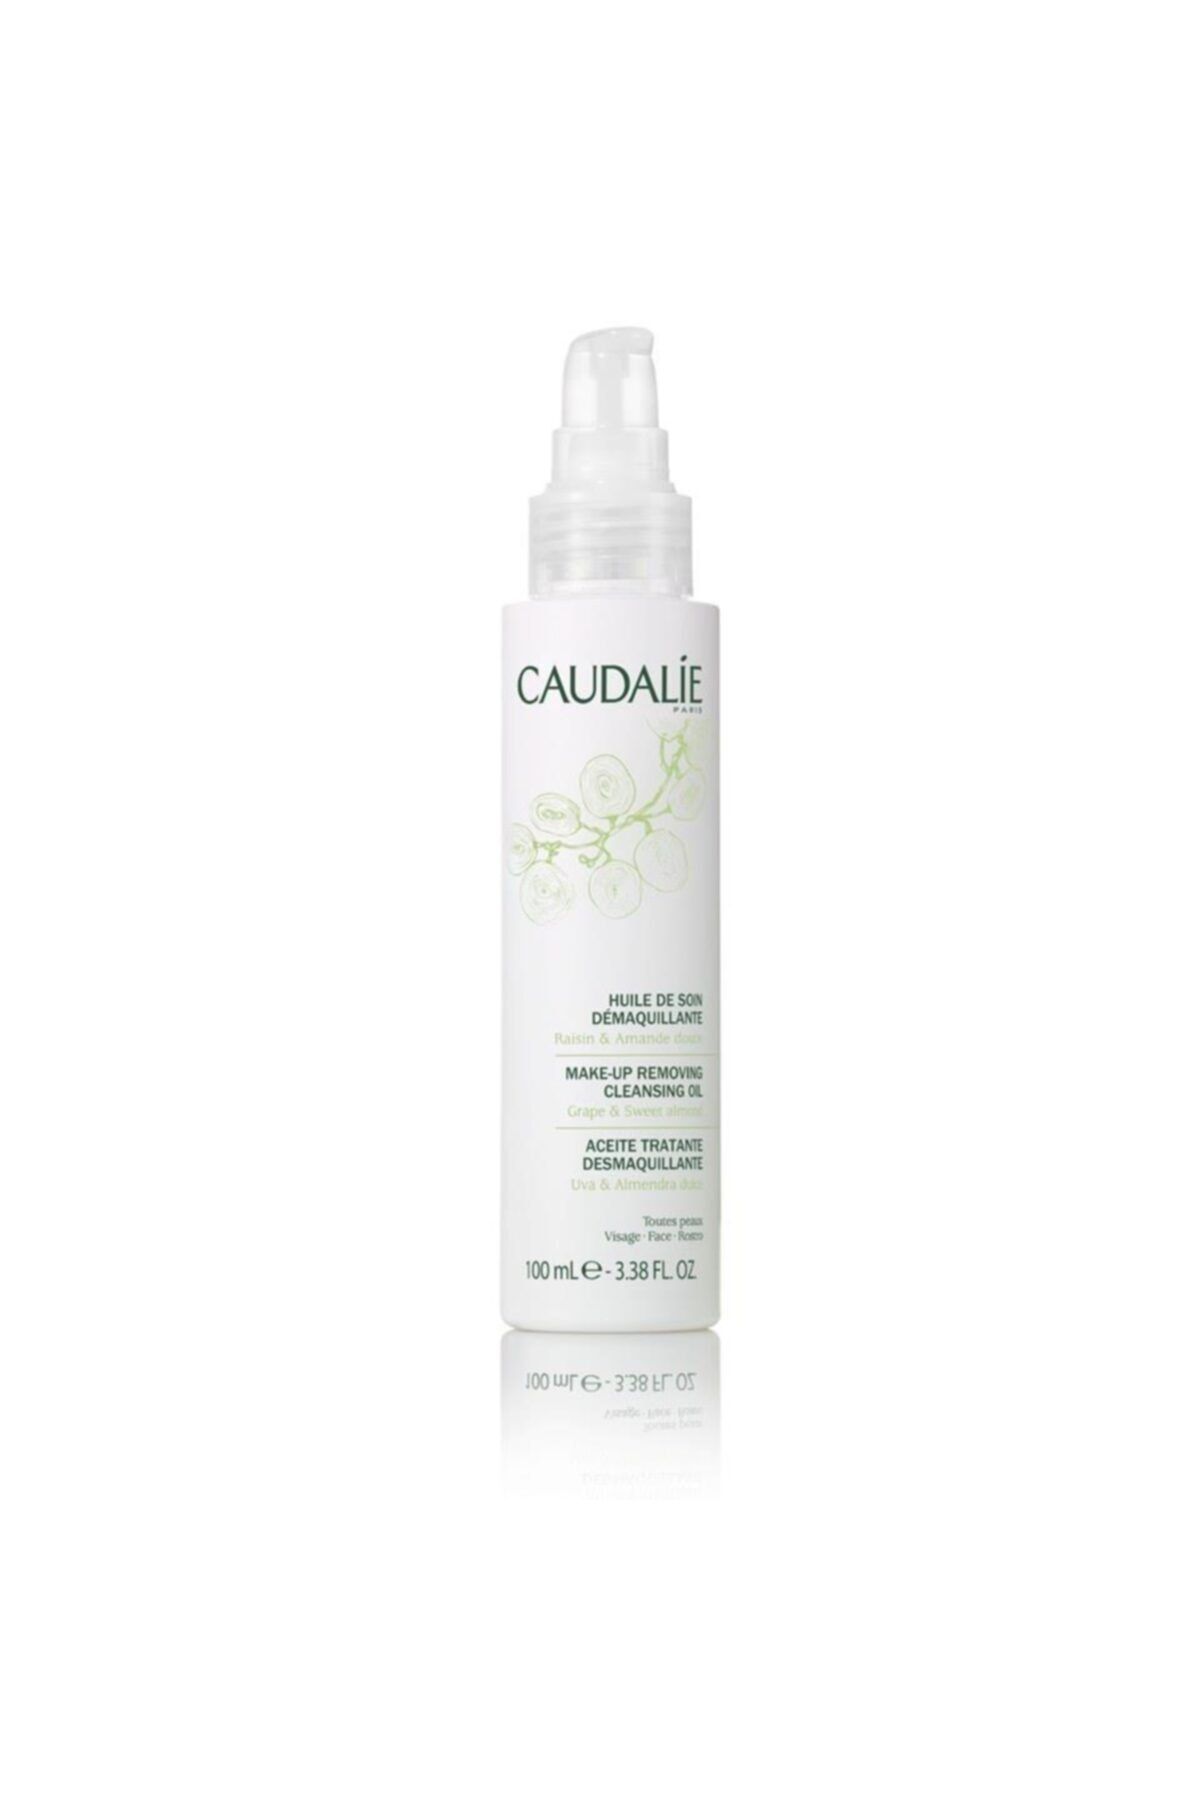 Caudalie Make-up Removing Cleansing 100 ml